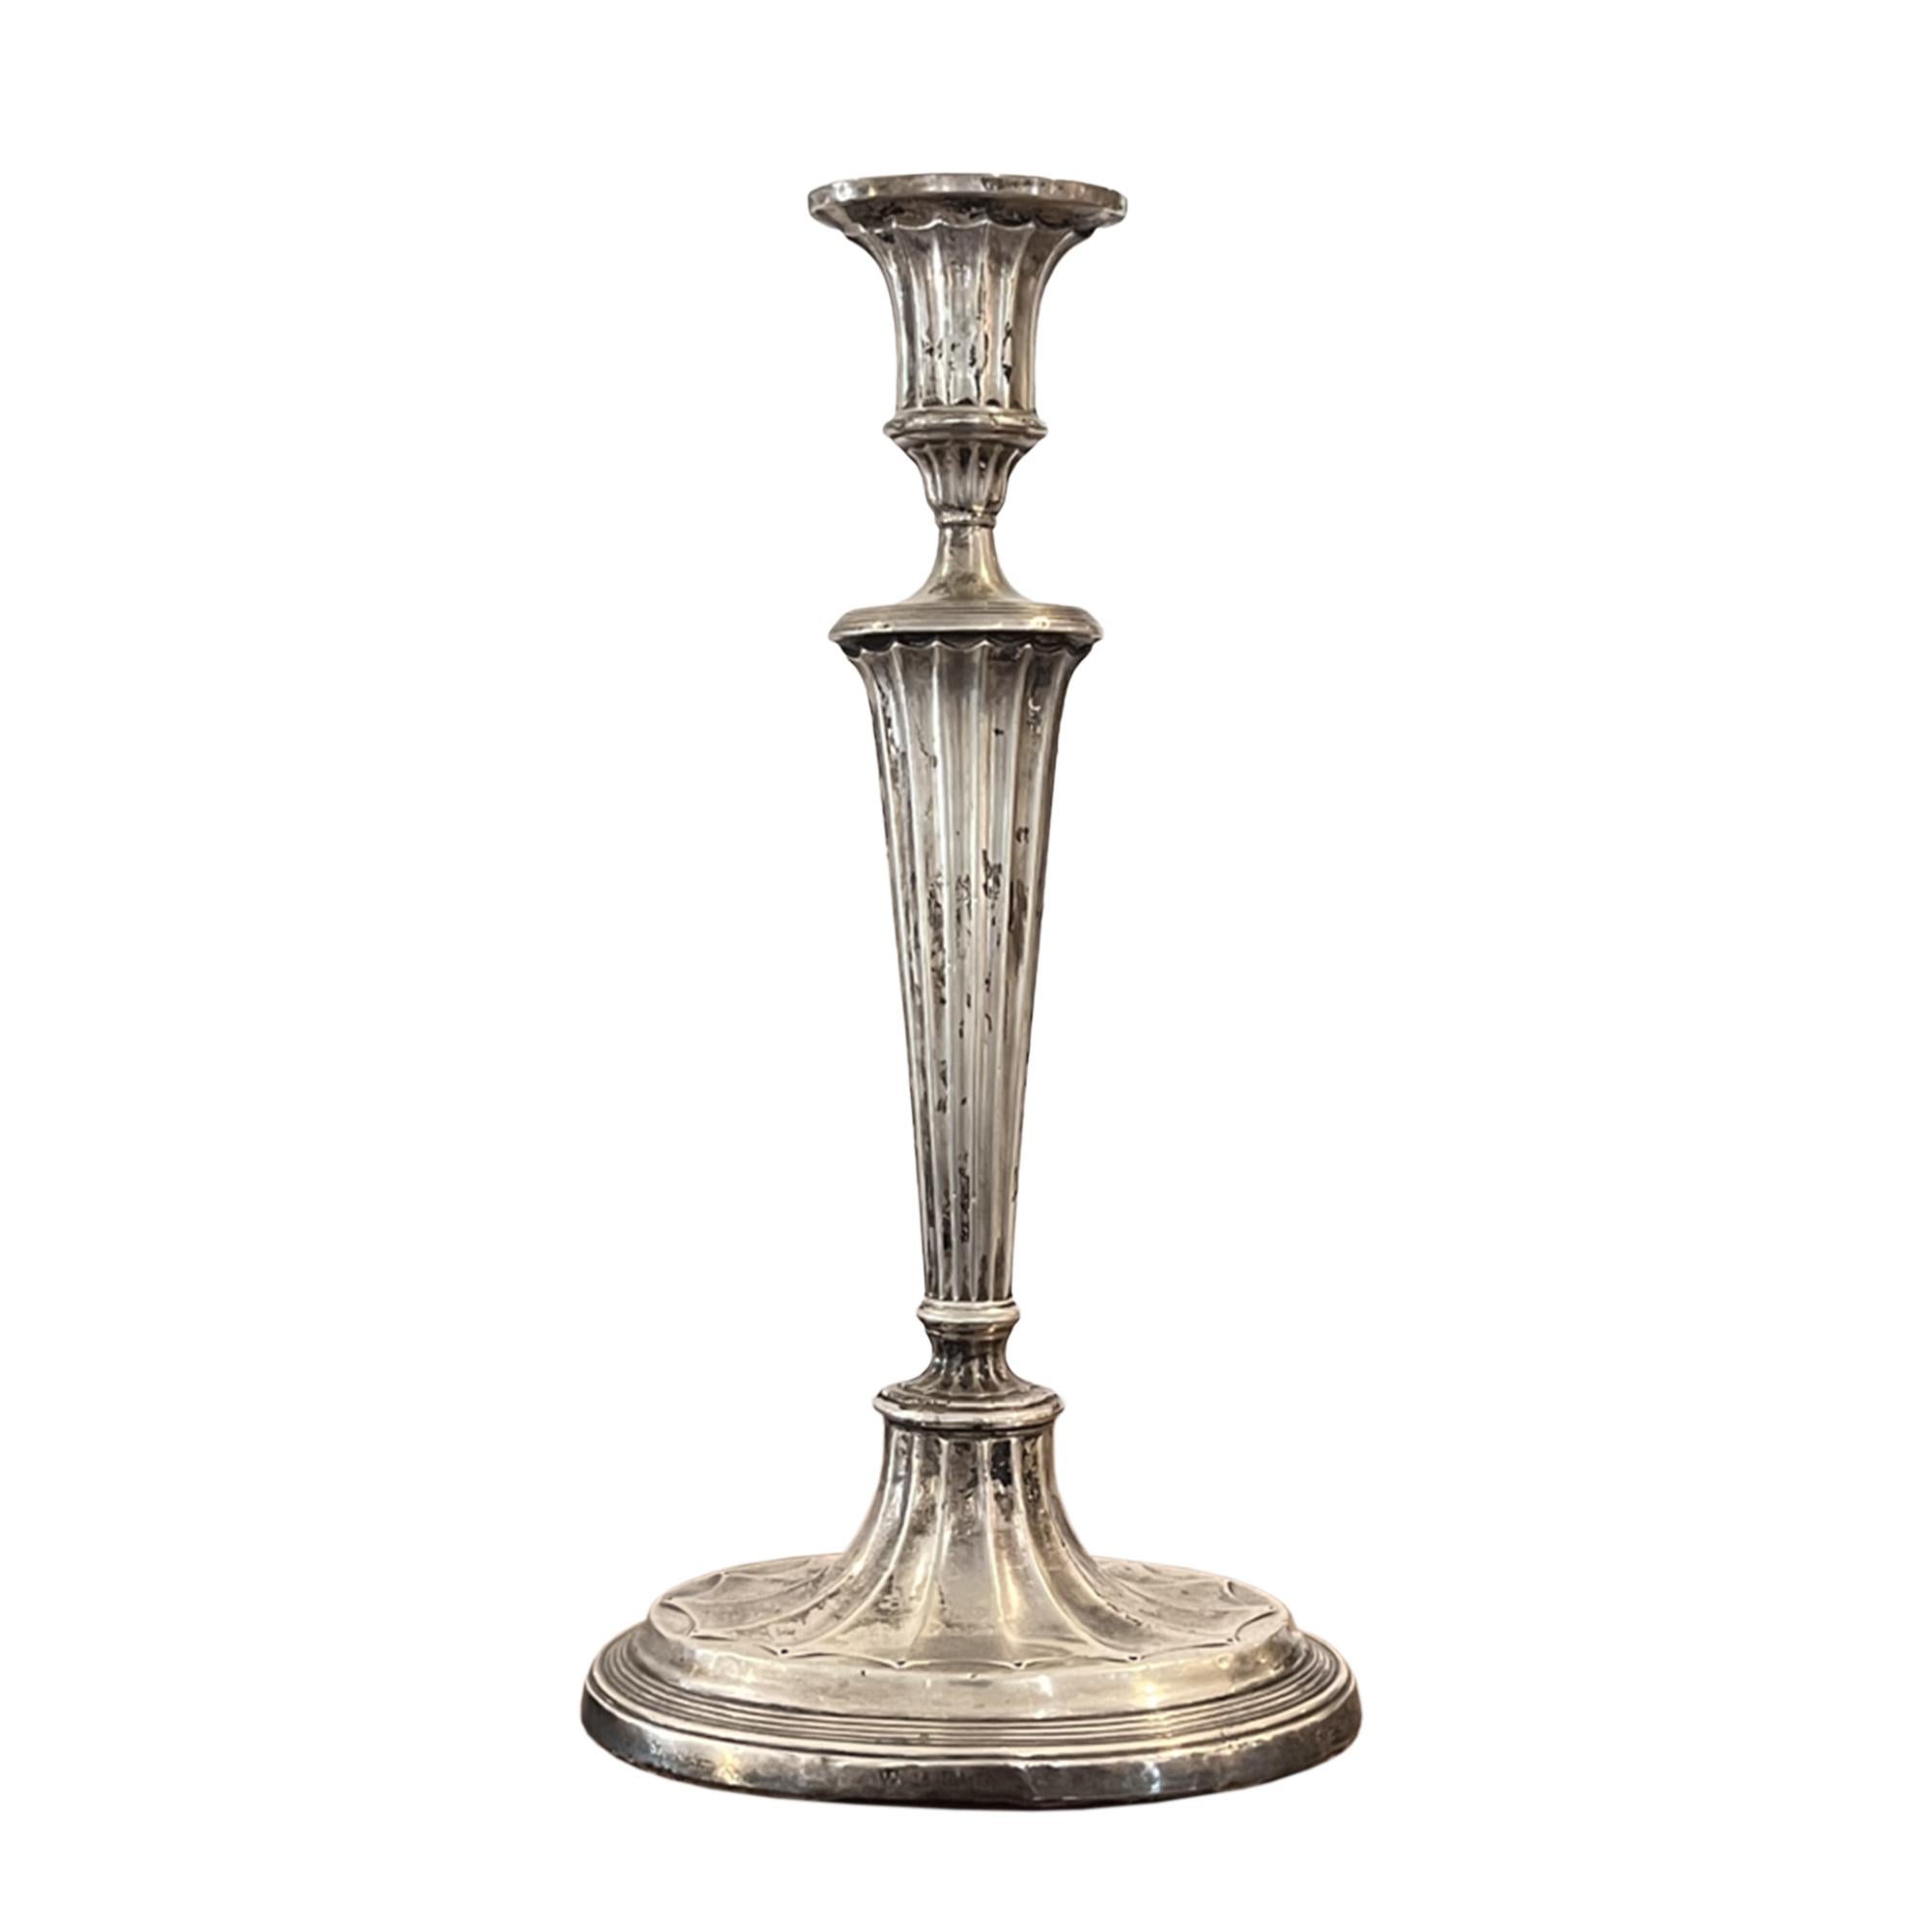 This elegant pair of silver candlesticks are hallmarked with the Birmingham, England assay mark for 1901.

Please take a look at all our pictures to see the graceful design of the sweeping bases. 

A great addition to a celebrational dining table